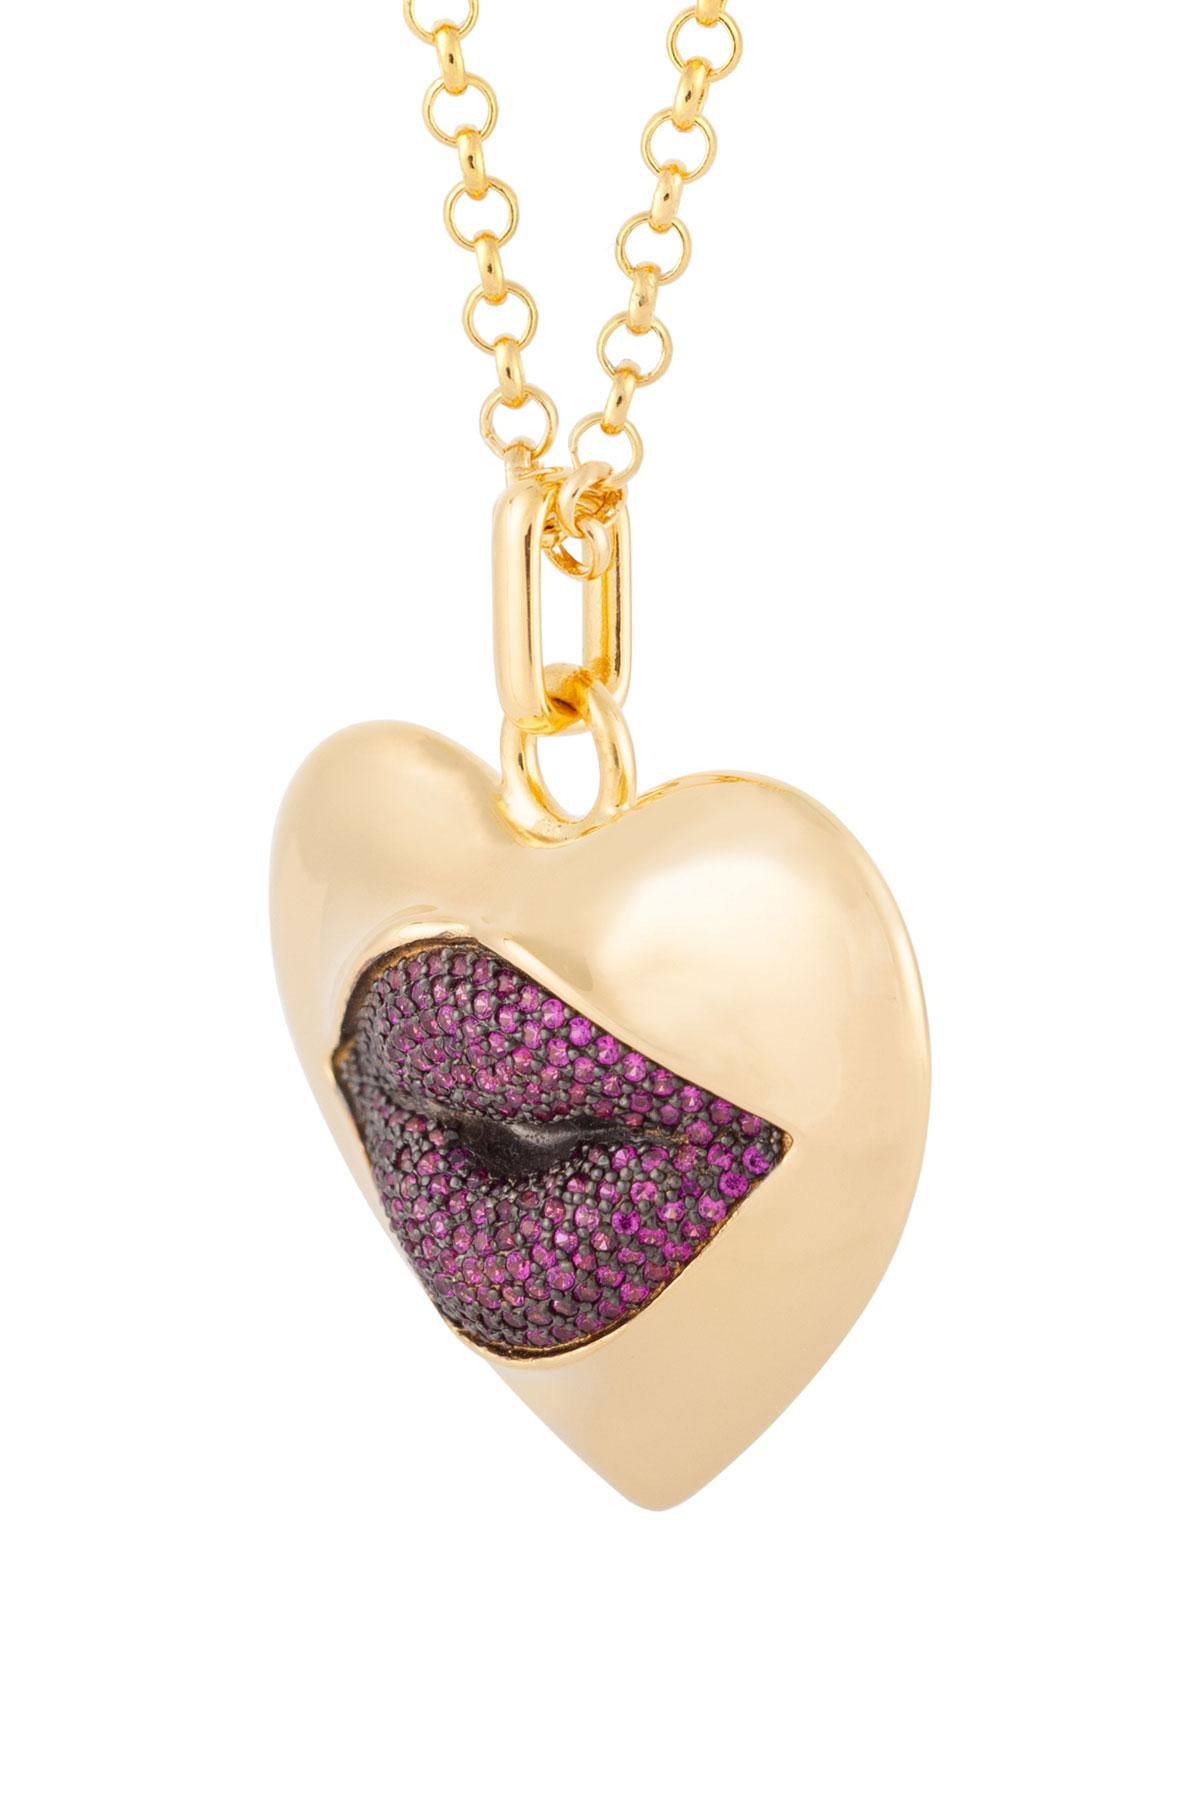 Our pendant necklace is made with high-quality gold vermeil, ensuring it is durable and long-lasting. The heart shape design symbolizes love , making it a thoughtful gift for someone special or a perfect treat for yourself. 

With its super sexy,